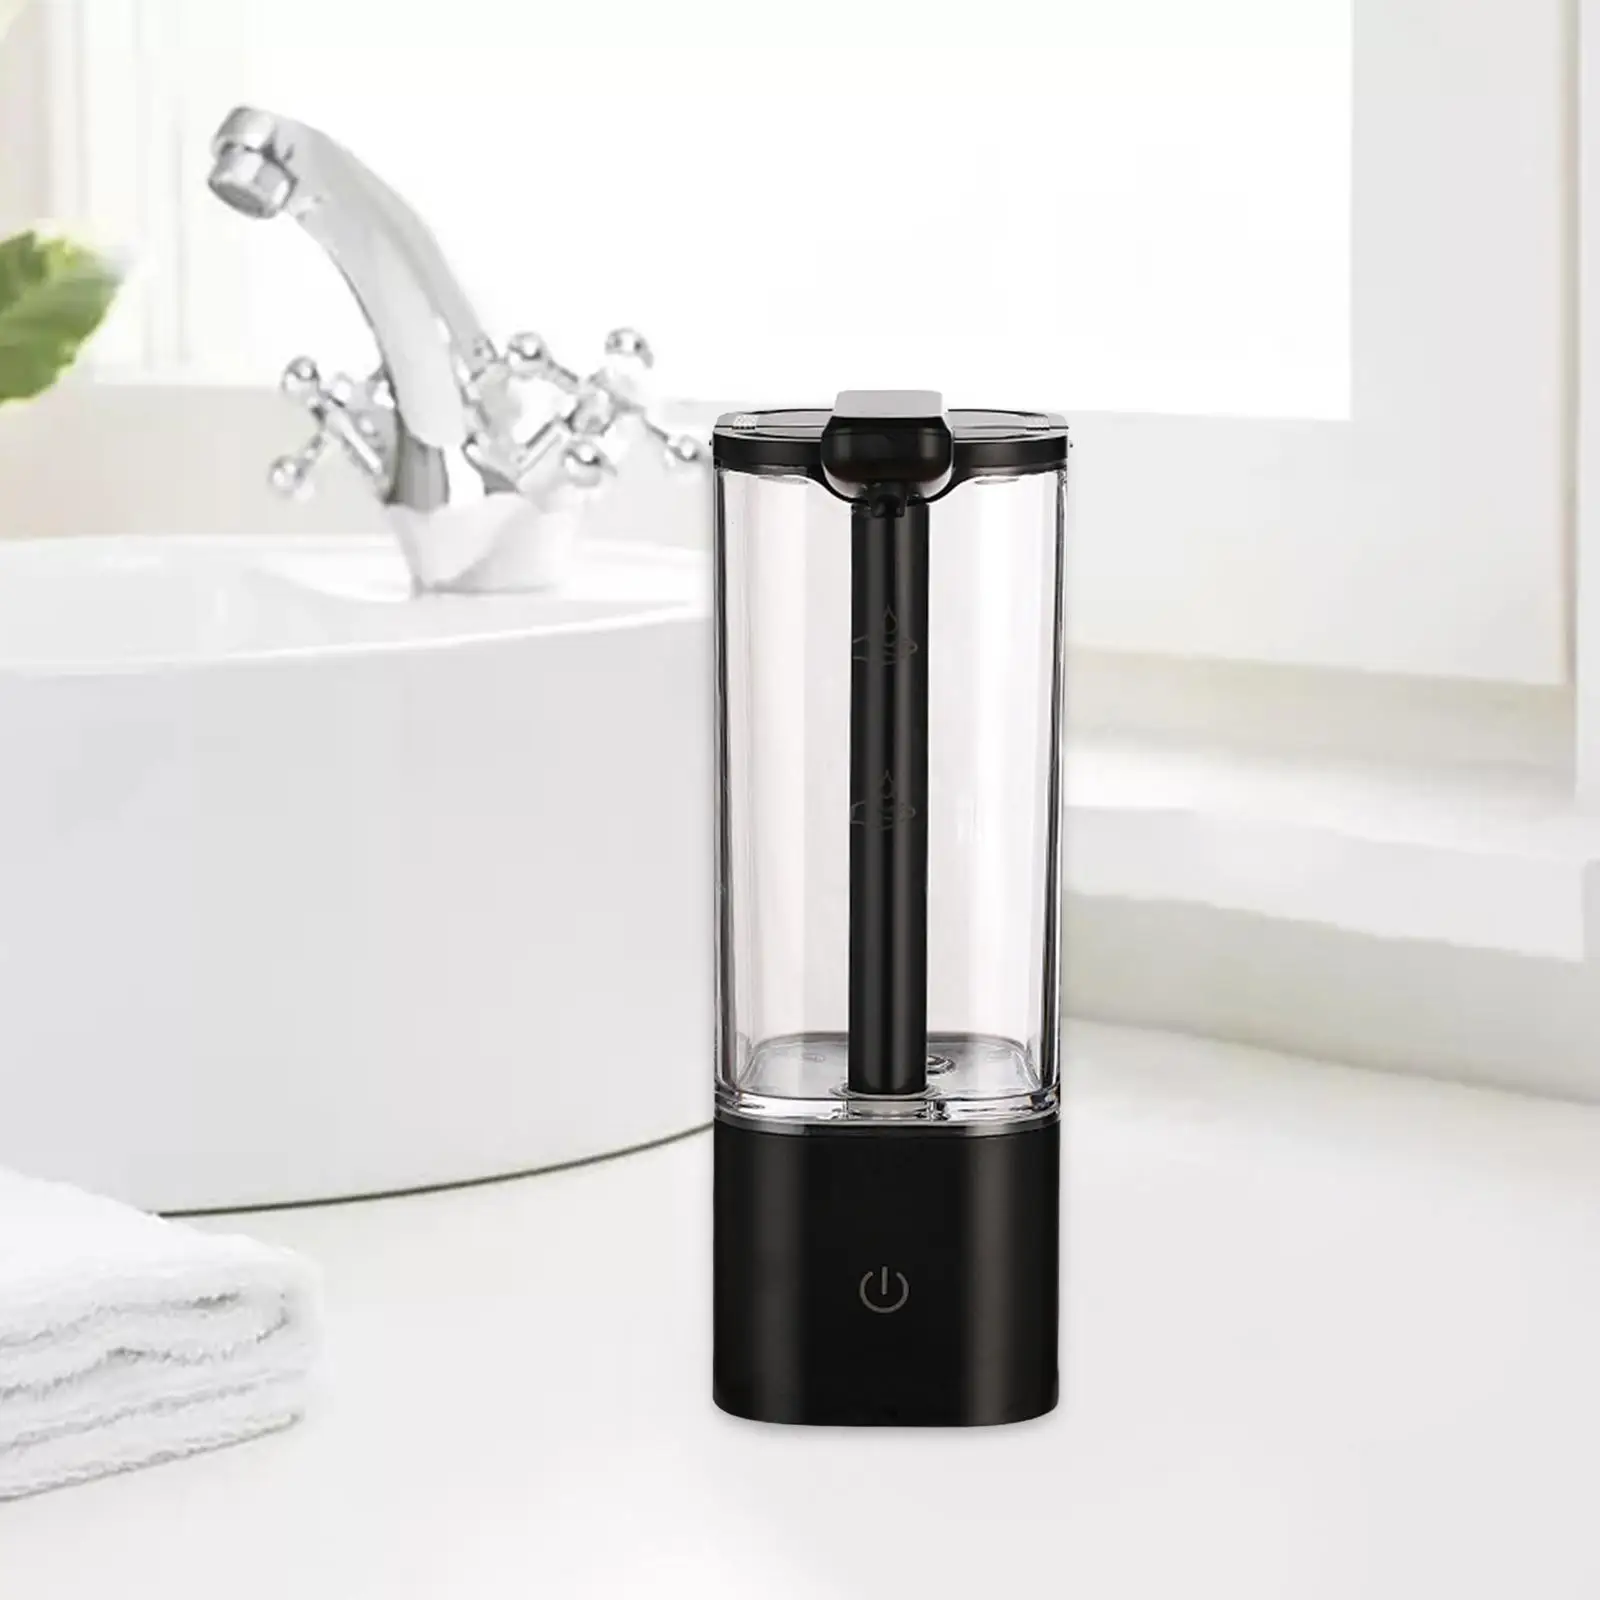 Soap Pump Dish Soap Dispenser 500ml Automatic Soap Dispenser Automatic Liquid Soap Dispenser for Commercial or Household Use